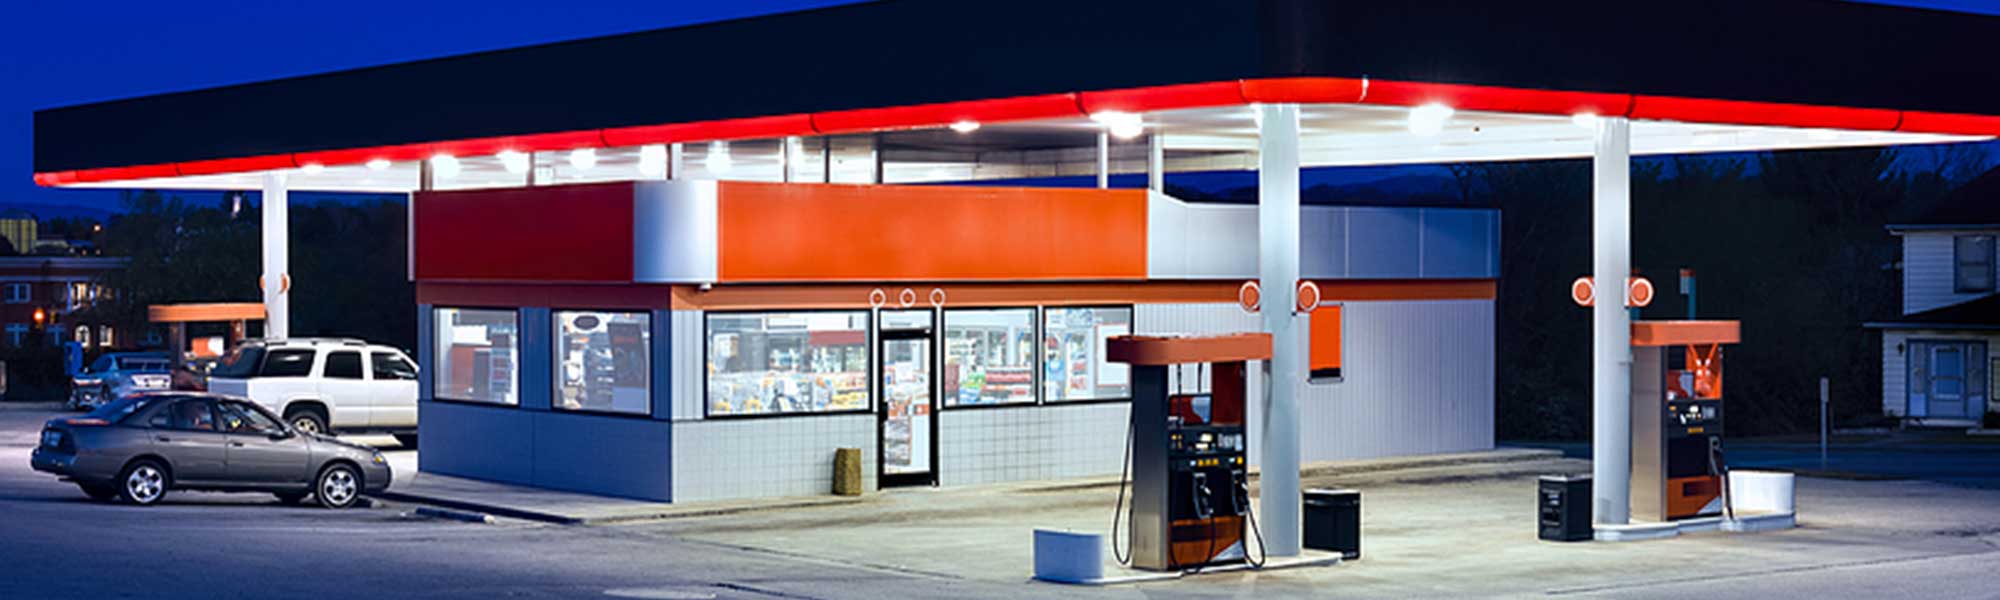 a convenience store with gas pumps at night